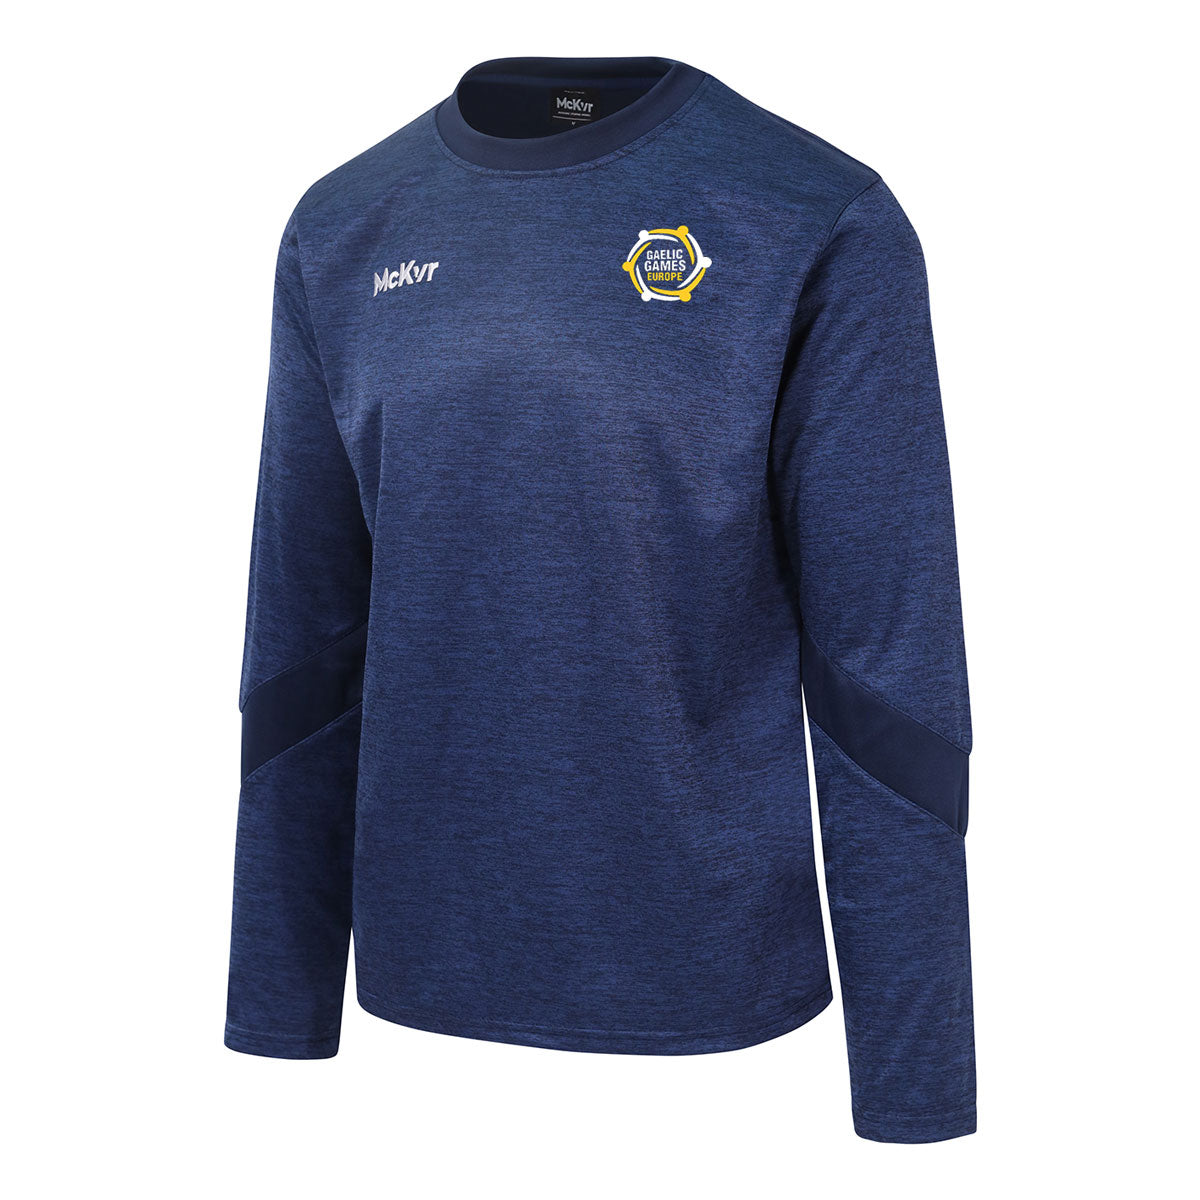 Mc Keever Gaelic Games Europe Core 22 Sweat Top - Youth - Navy